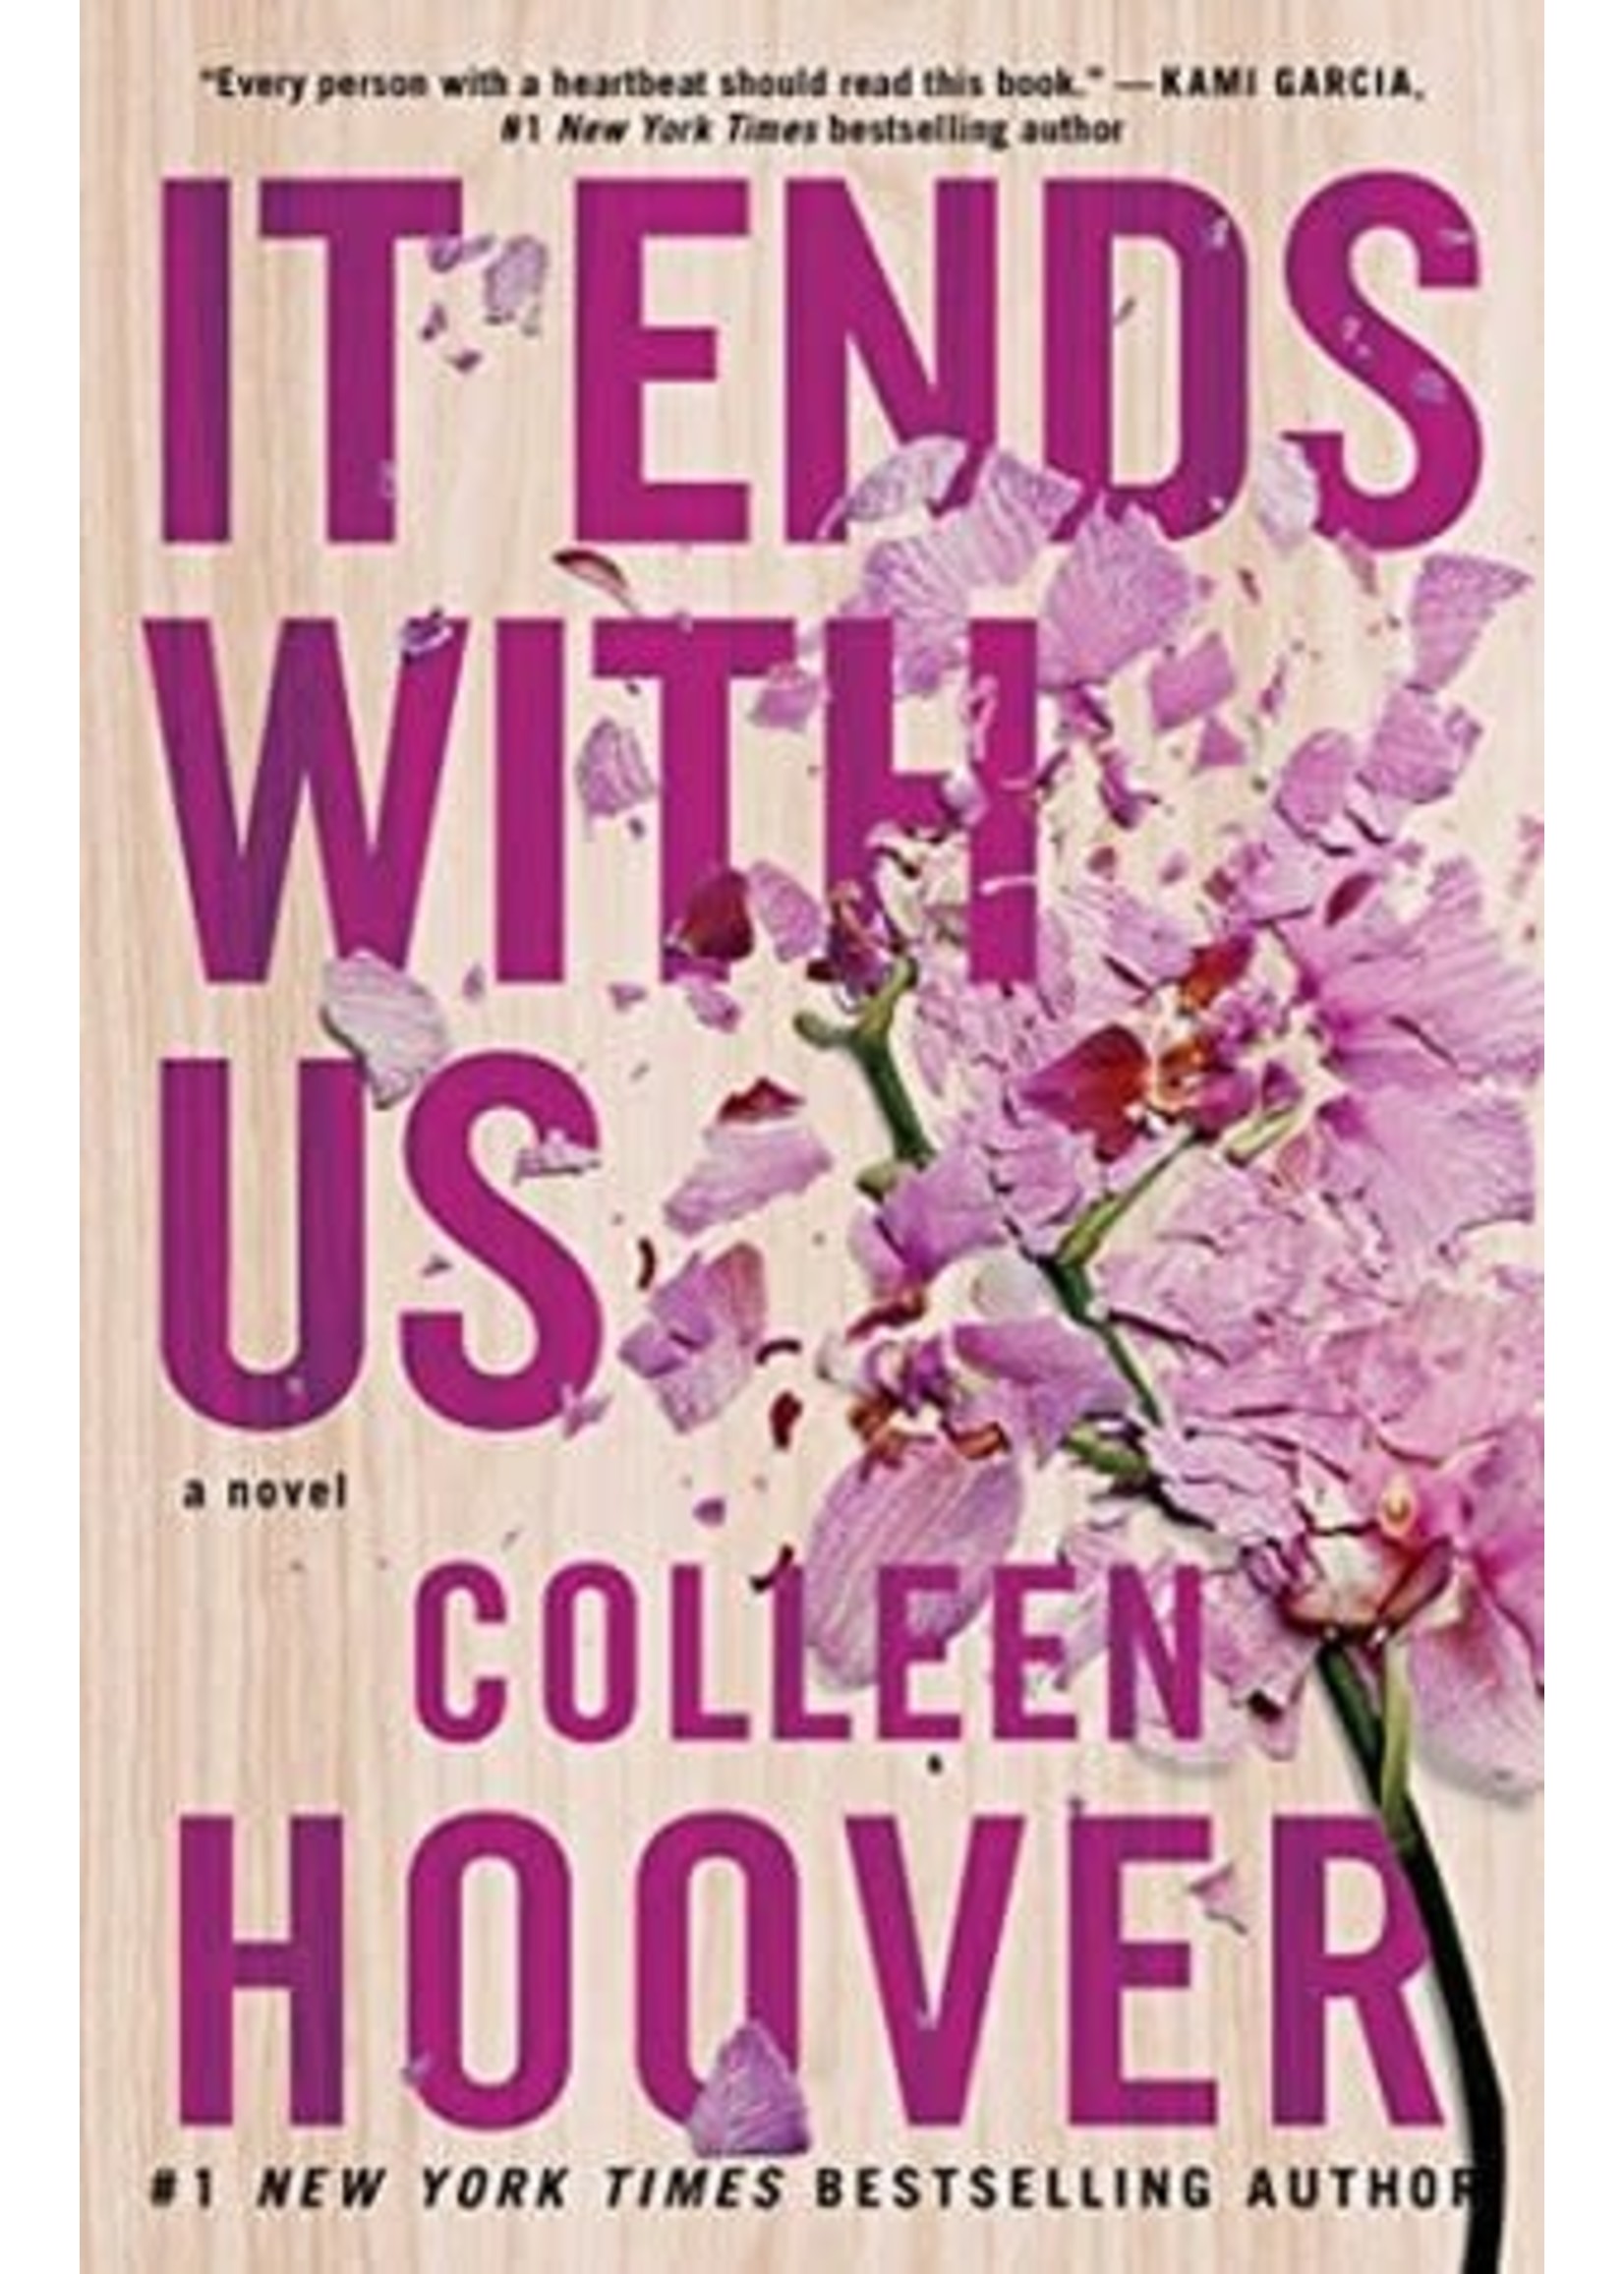 It Ends with Us (It Ends With Us #1) by Colleen Hoover